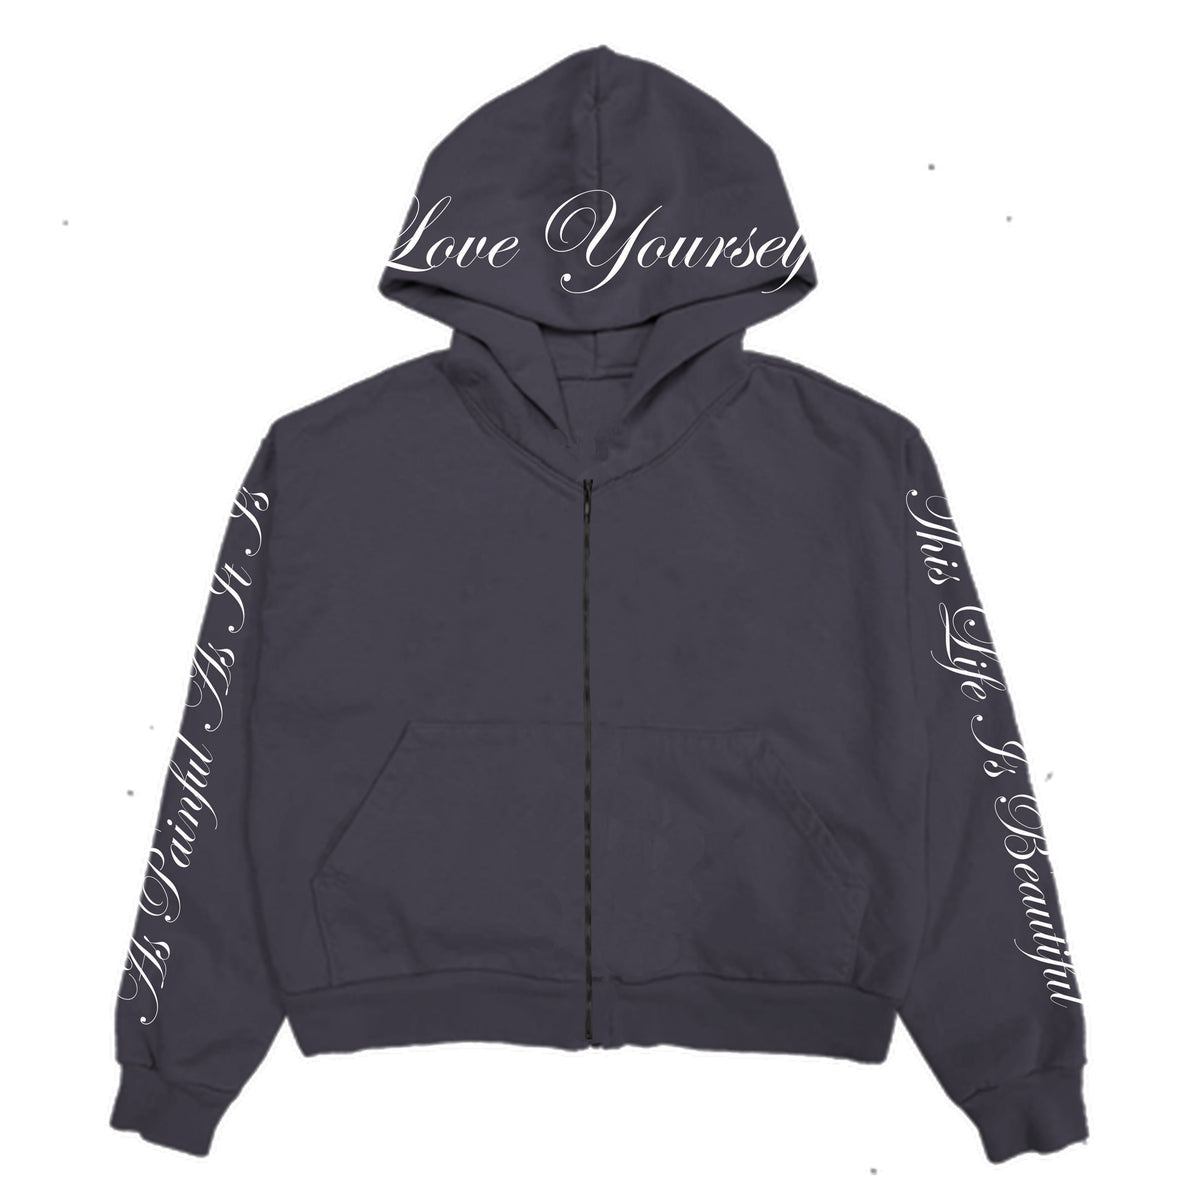 LOVE YOURSELF EMBROIDERED ZIP-UP - GREY